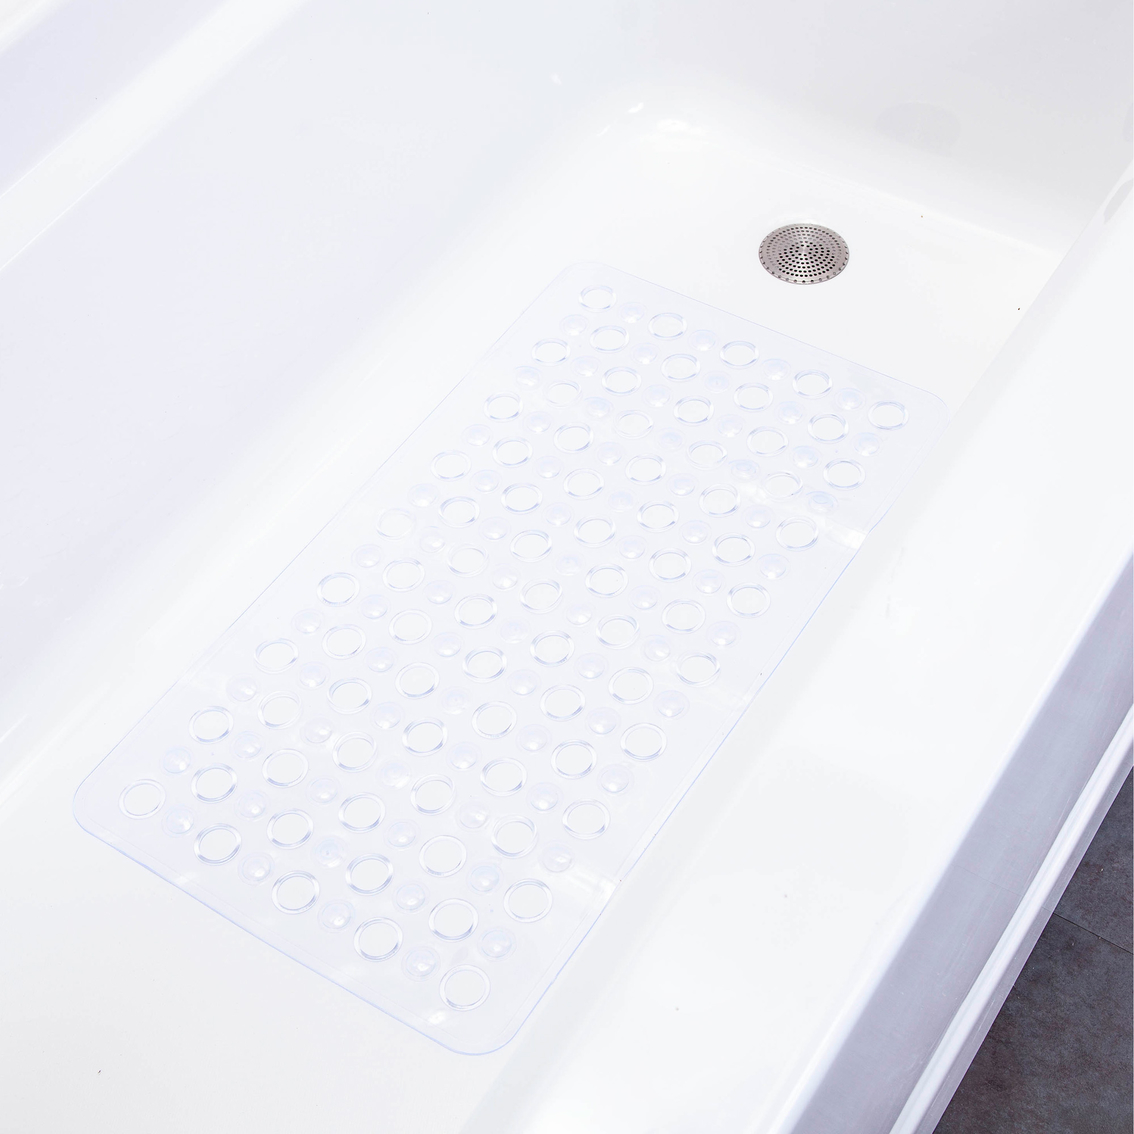 Kenney Non-Slip 14.5 x 27 in. Bath, Shower and Tub Mat with Suction Cups - Image 2 of 2